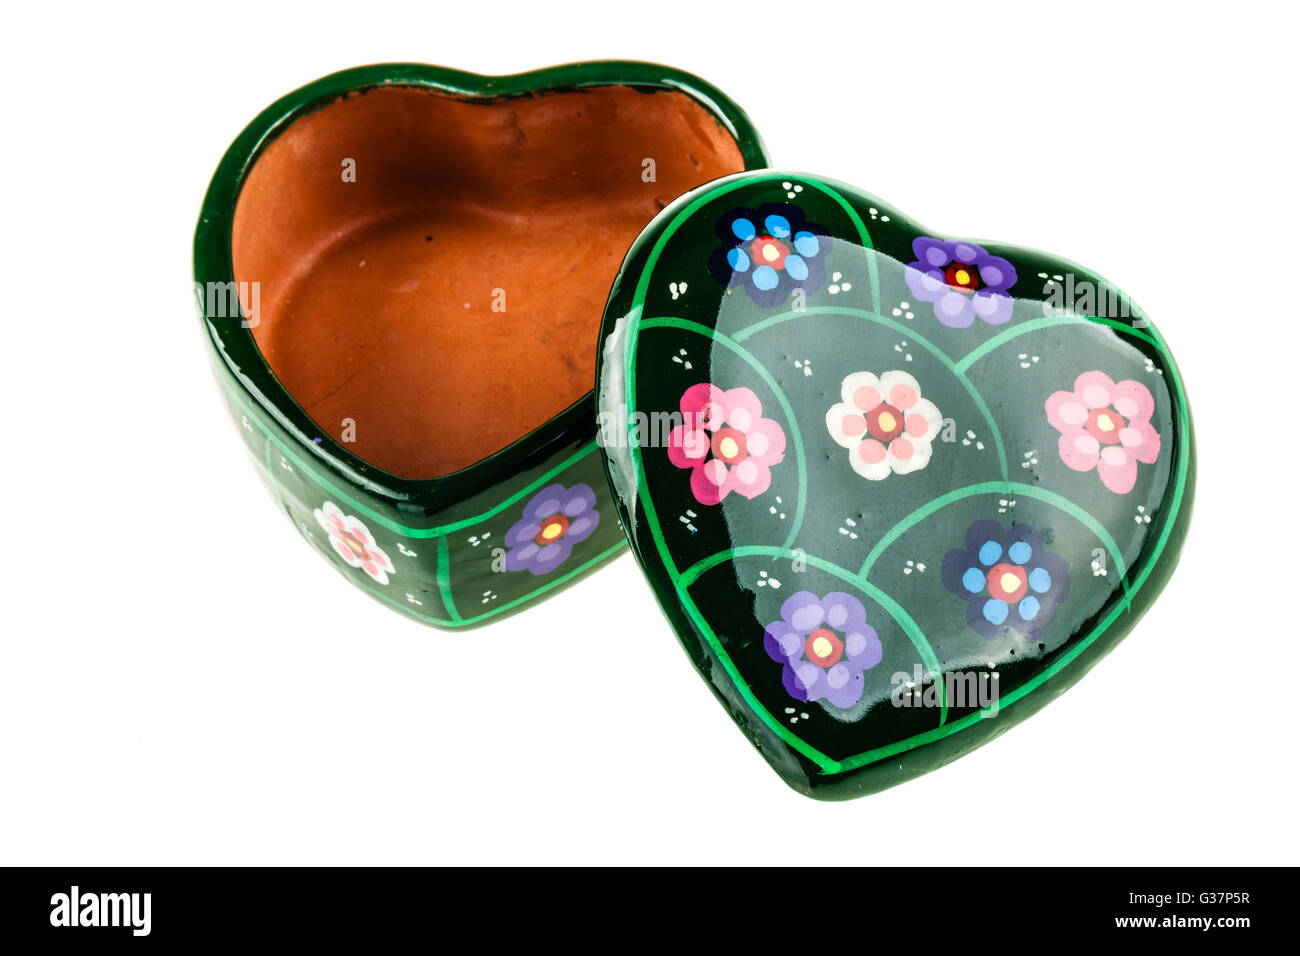 a heart shaped ceramic box isolated over a white background Stock Photo